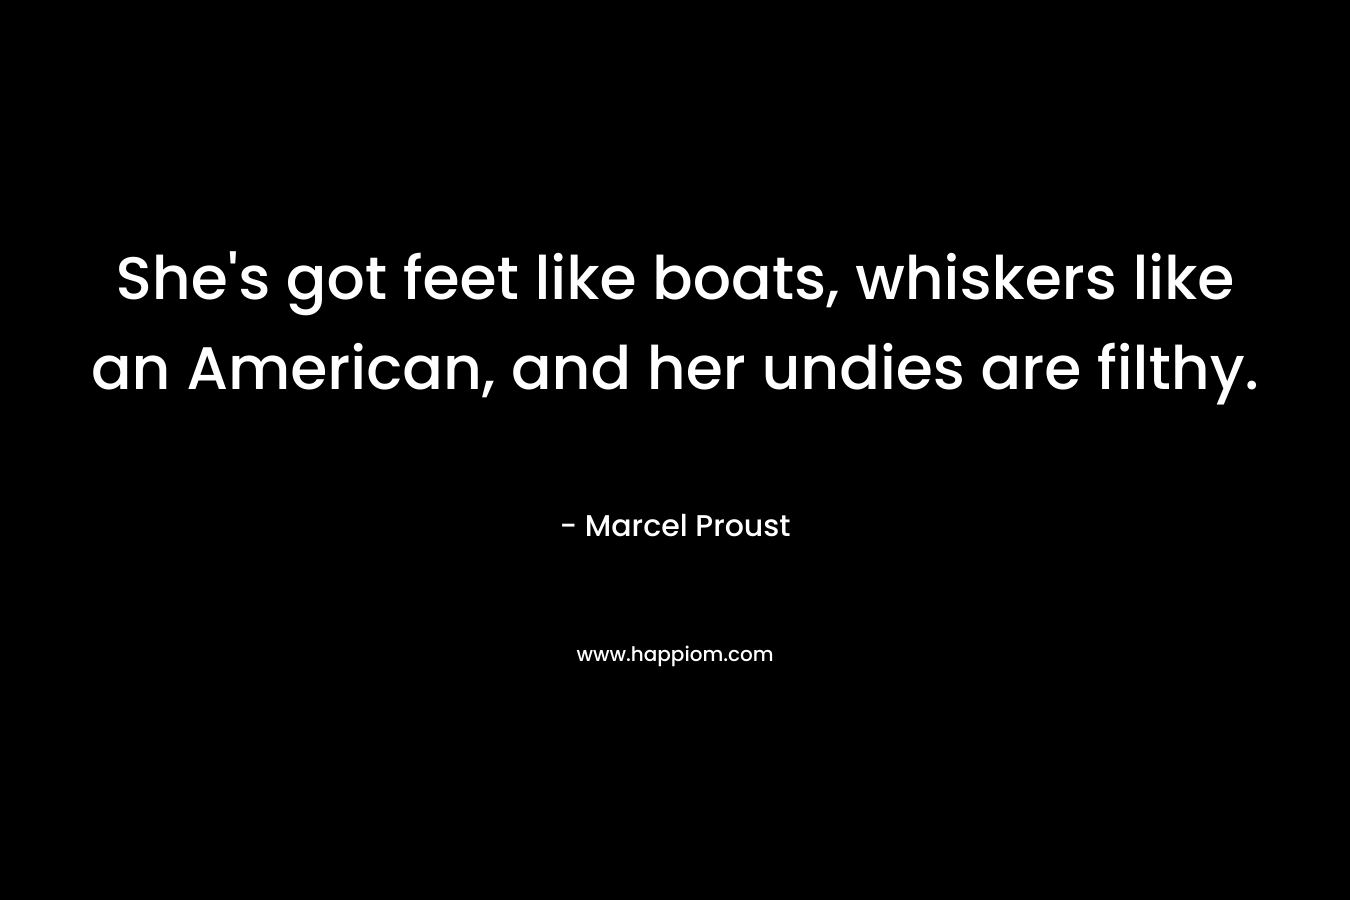 She's got feet like boats, whiskers like an American, and her undies are filthy.